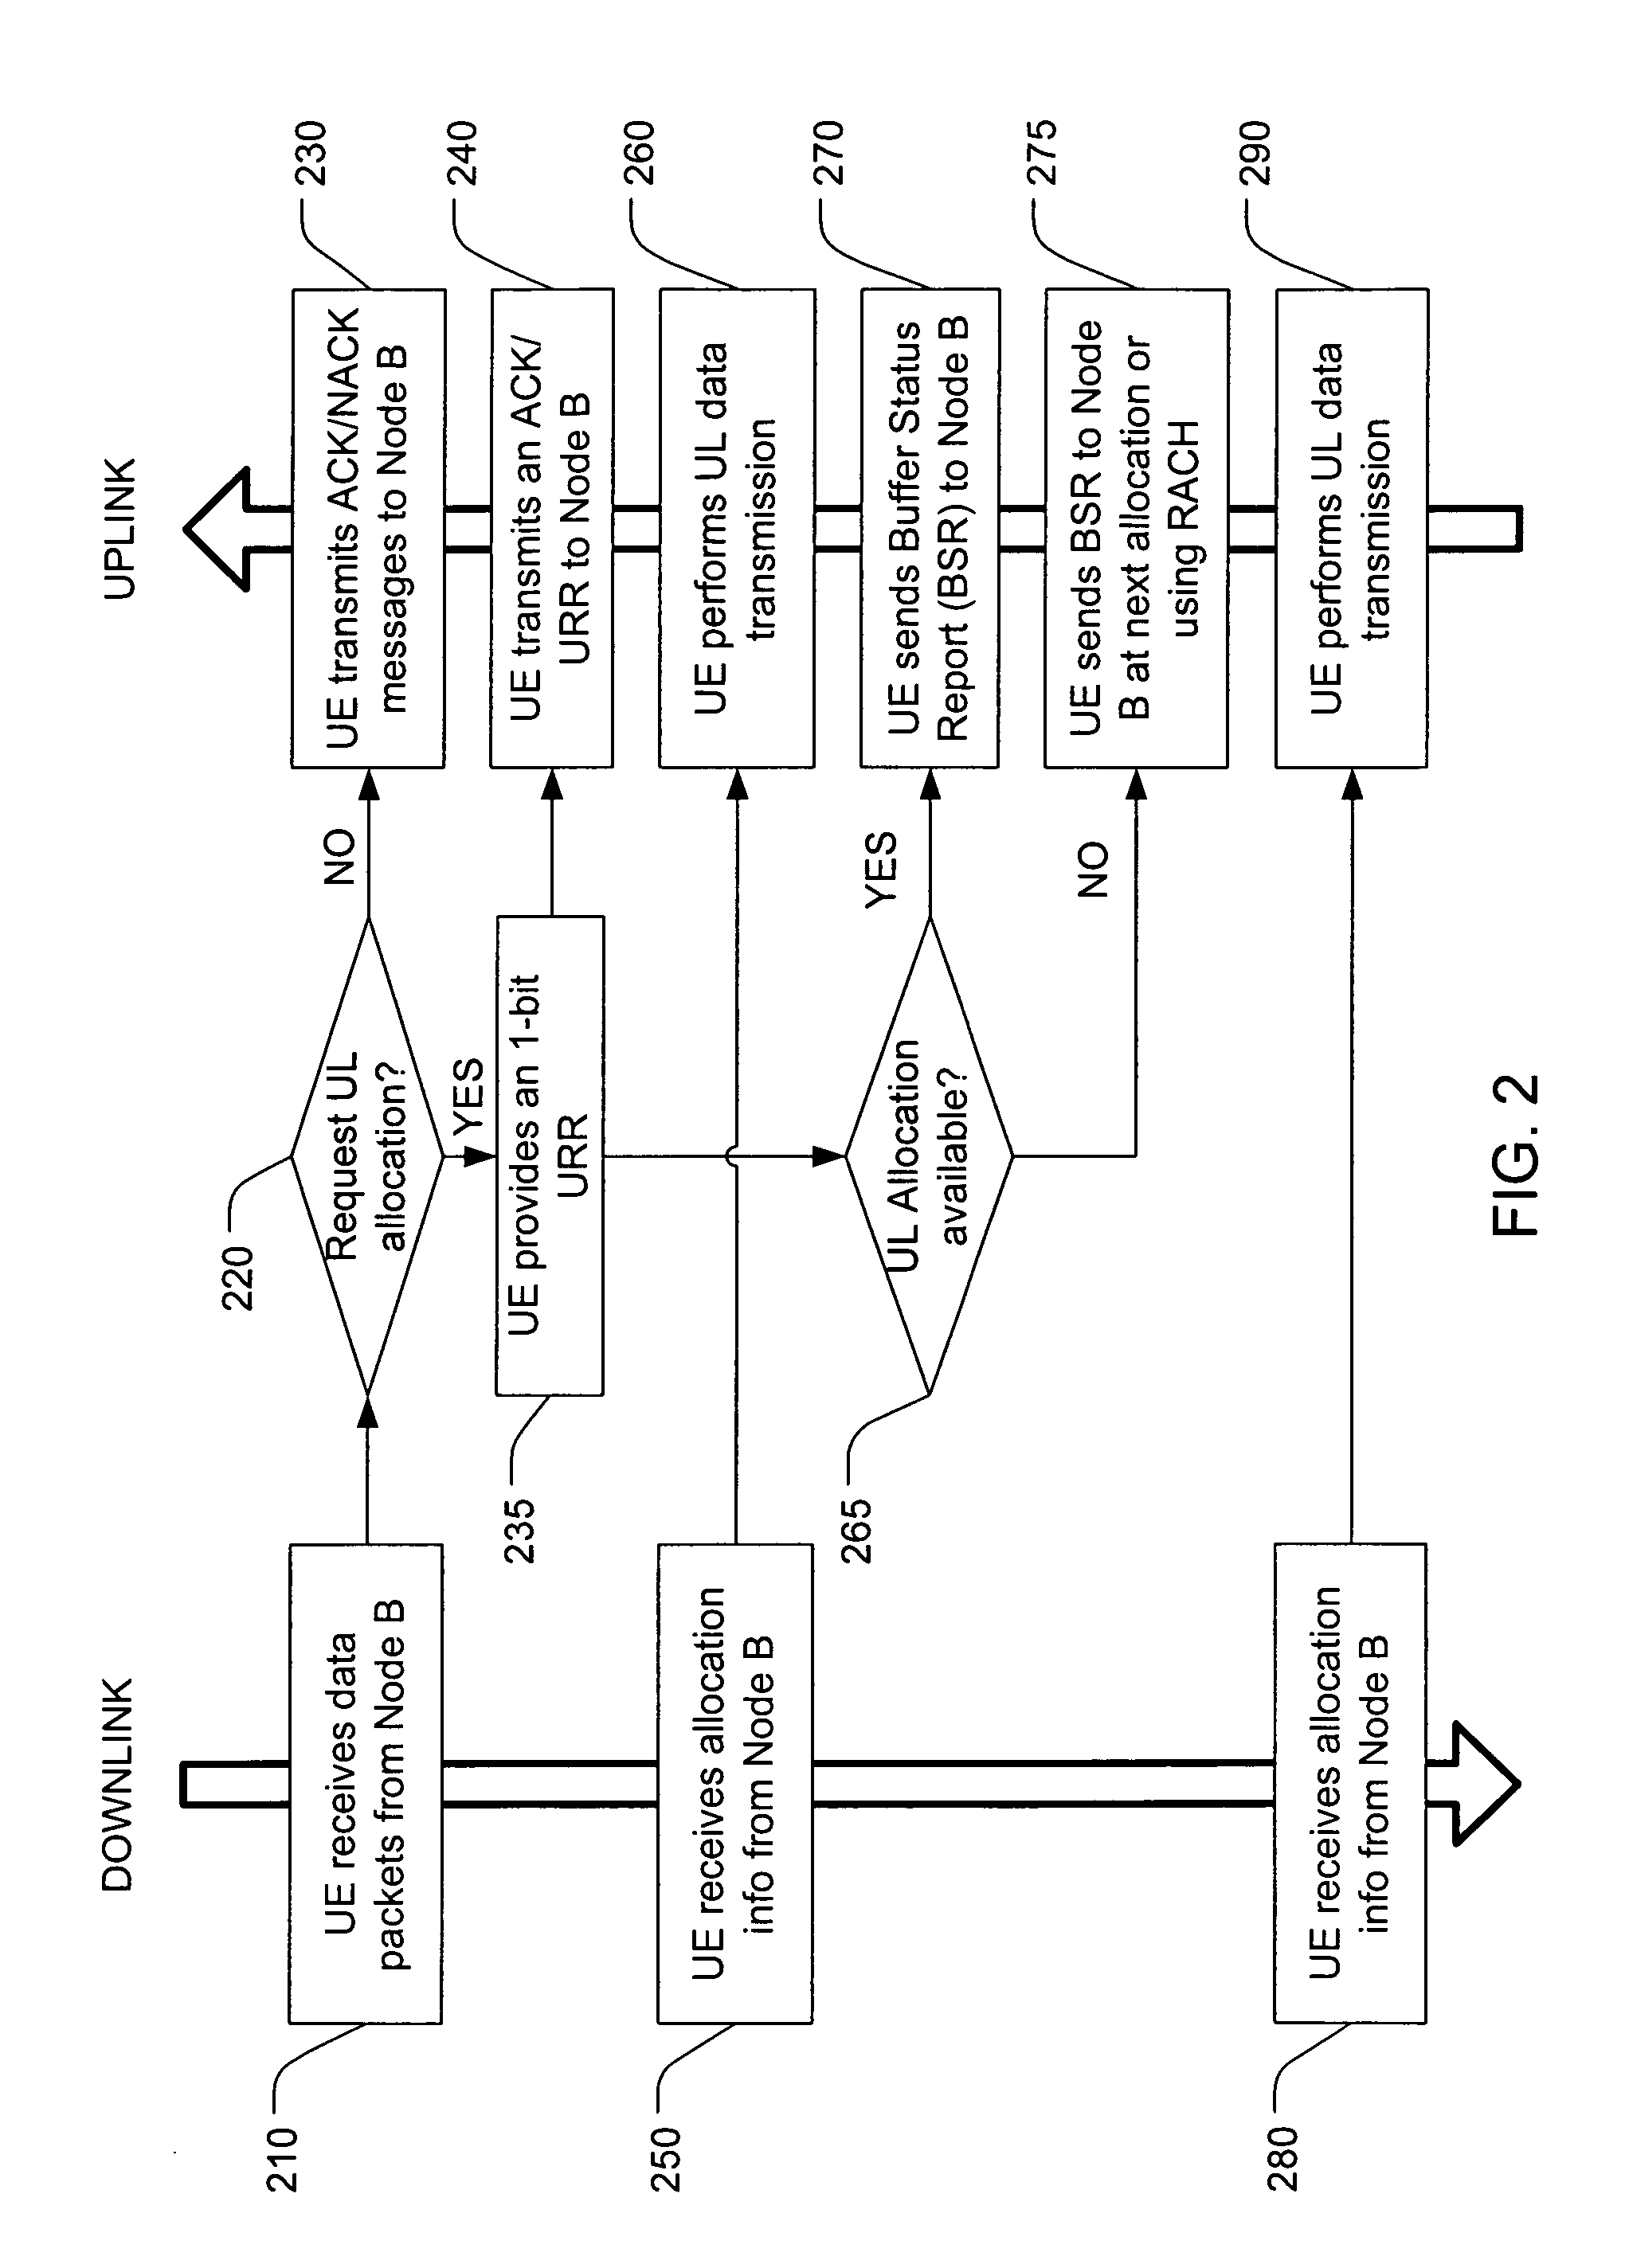 Method for requesting an uplink resource allocation during a downlink data transmission